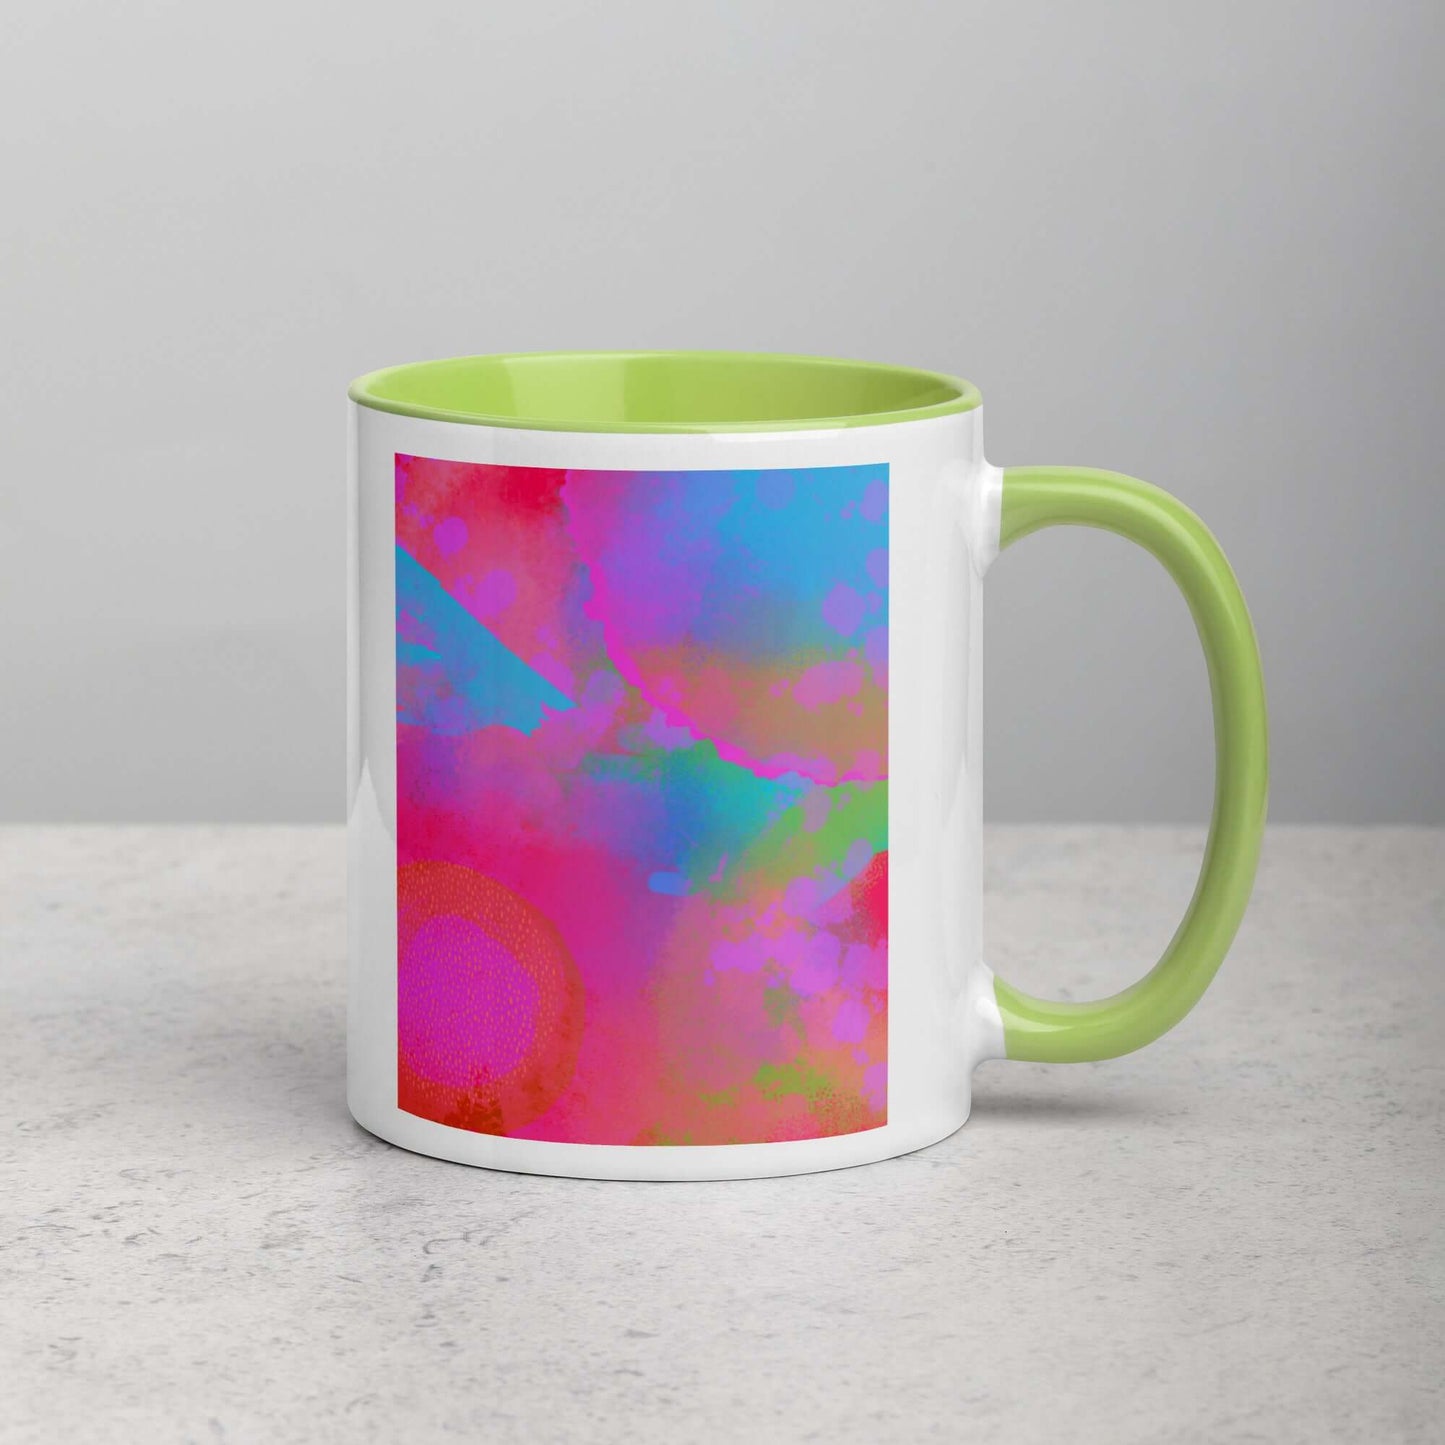 Hot Pink Intergalactic “Between Worlds” Abstract Art Mug with Lime Green Color Inside Right Handed Front View